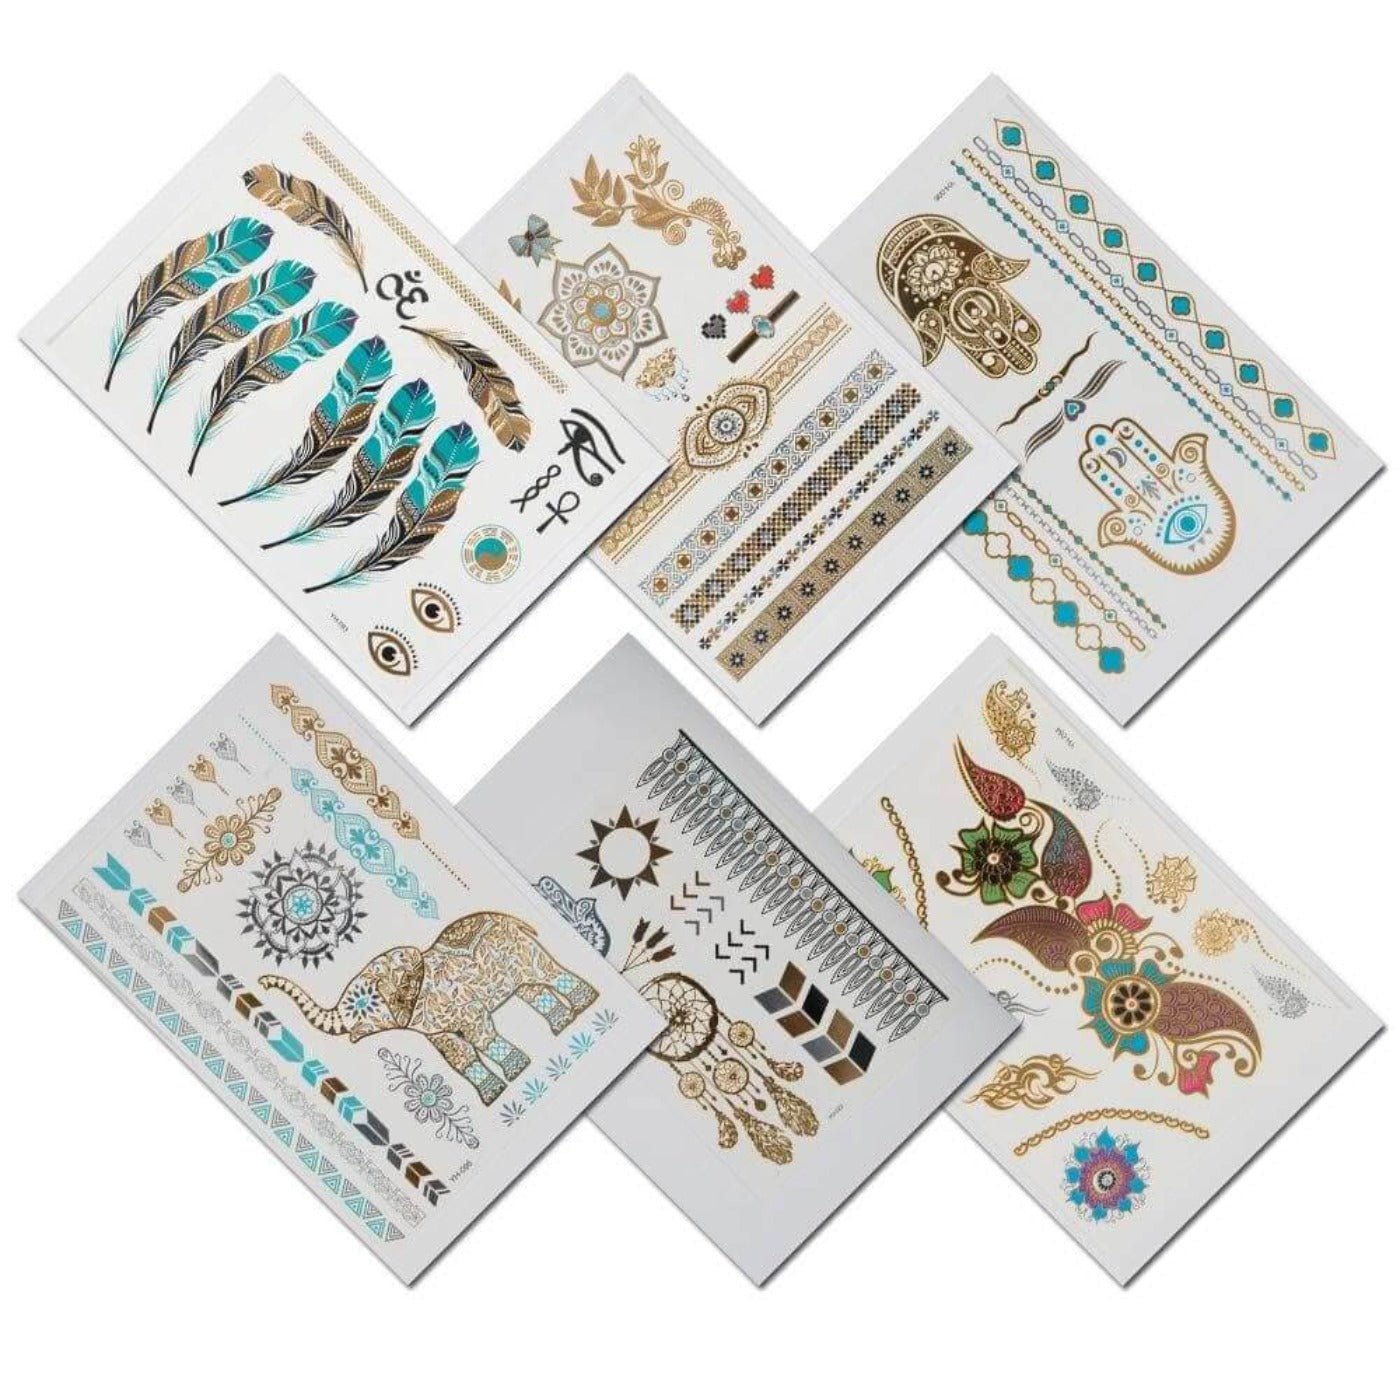 Cleopatra Goddess Metallic Temporary Tattoos for Women in Gold & Silver - Luma by Laura